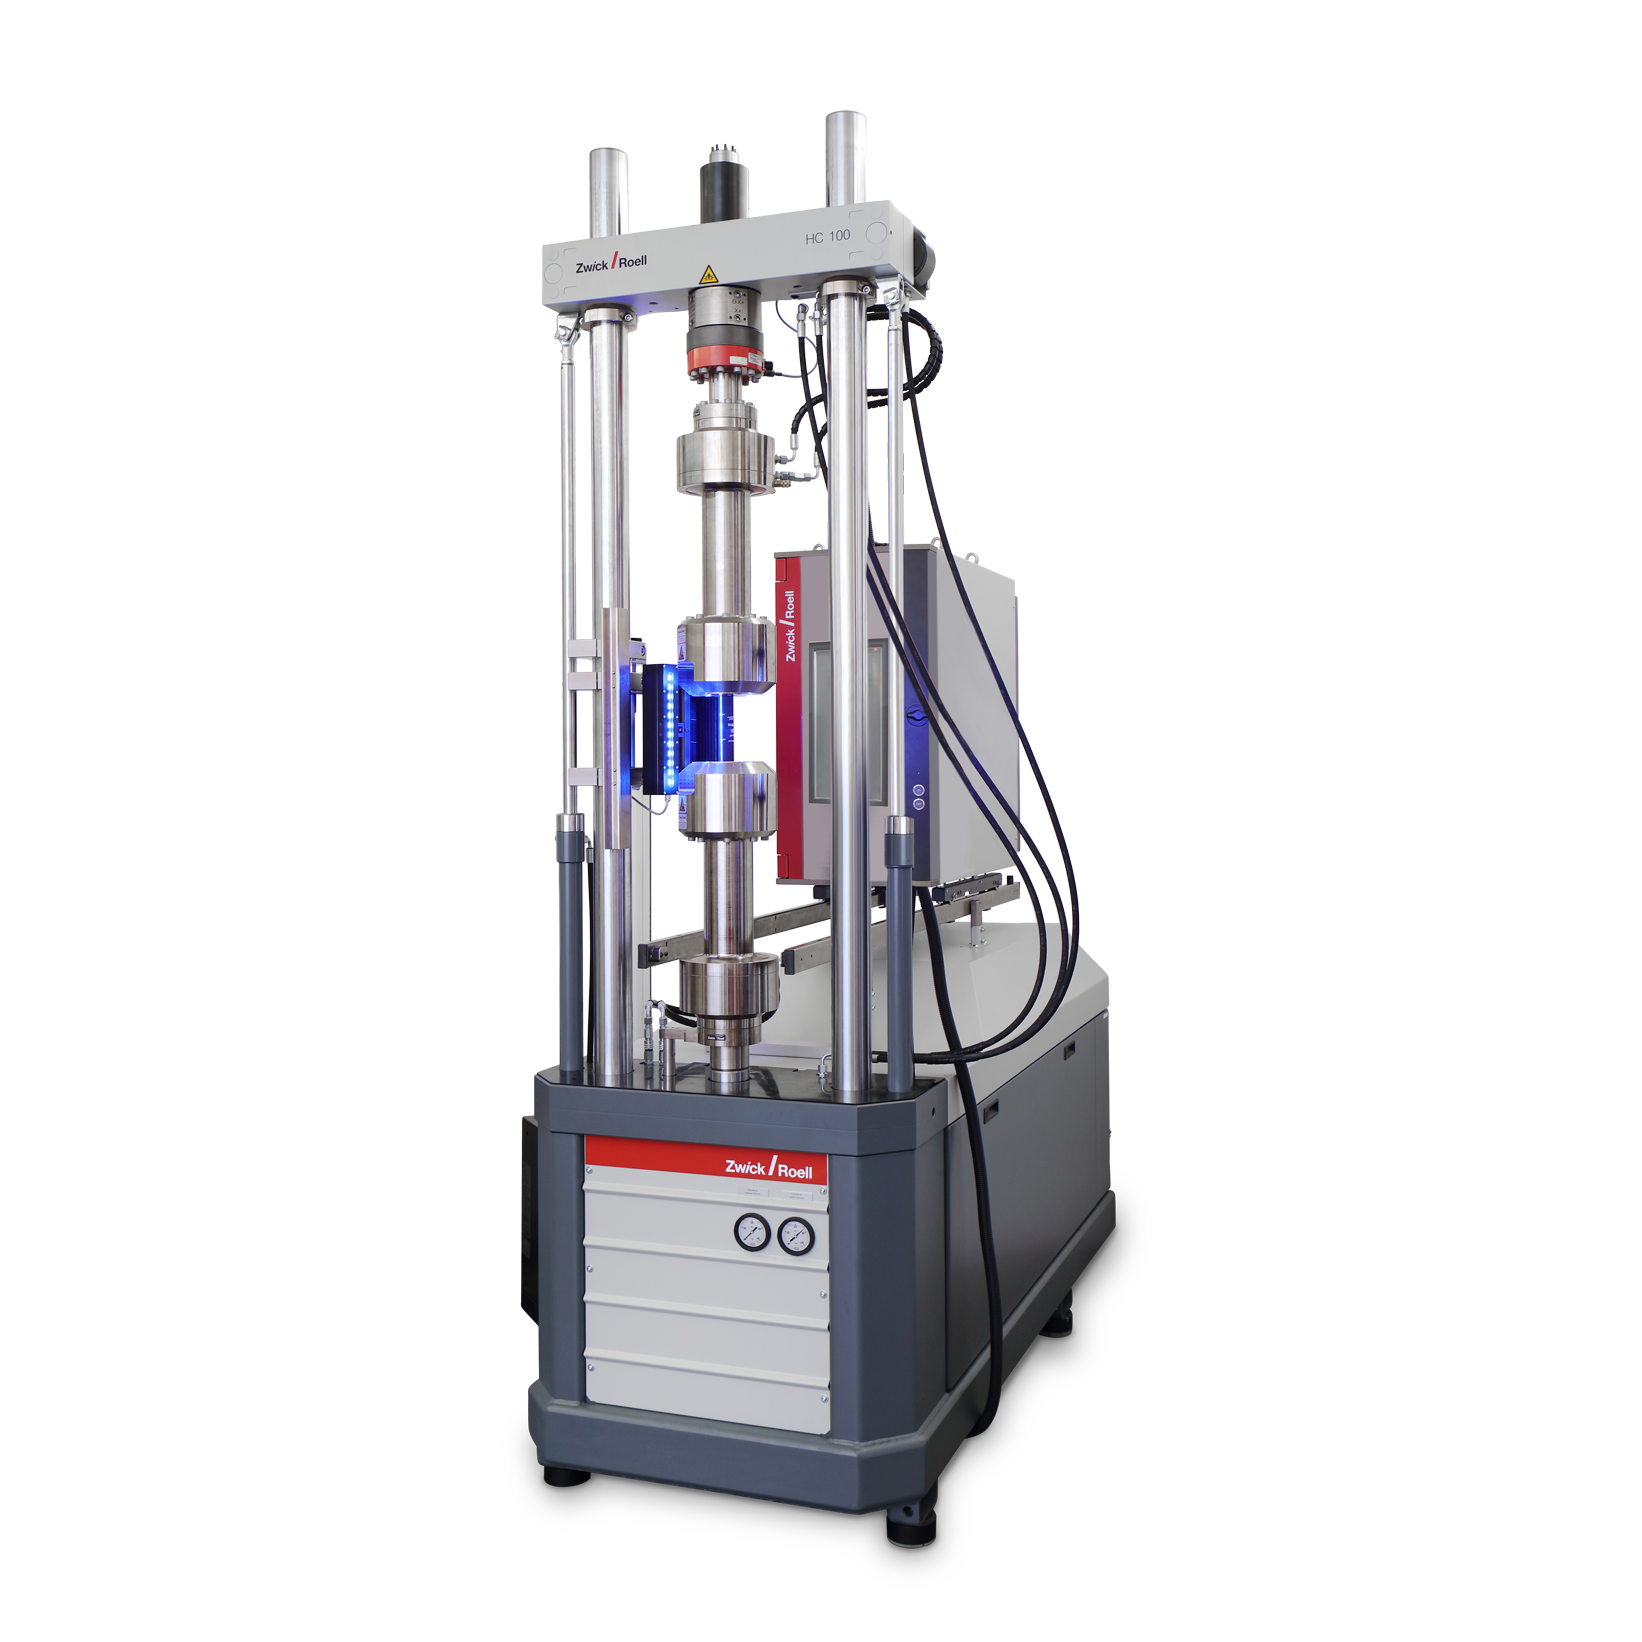 Servohydraulic testing machine as compact system with integrated hydraulic power pack